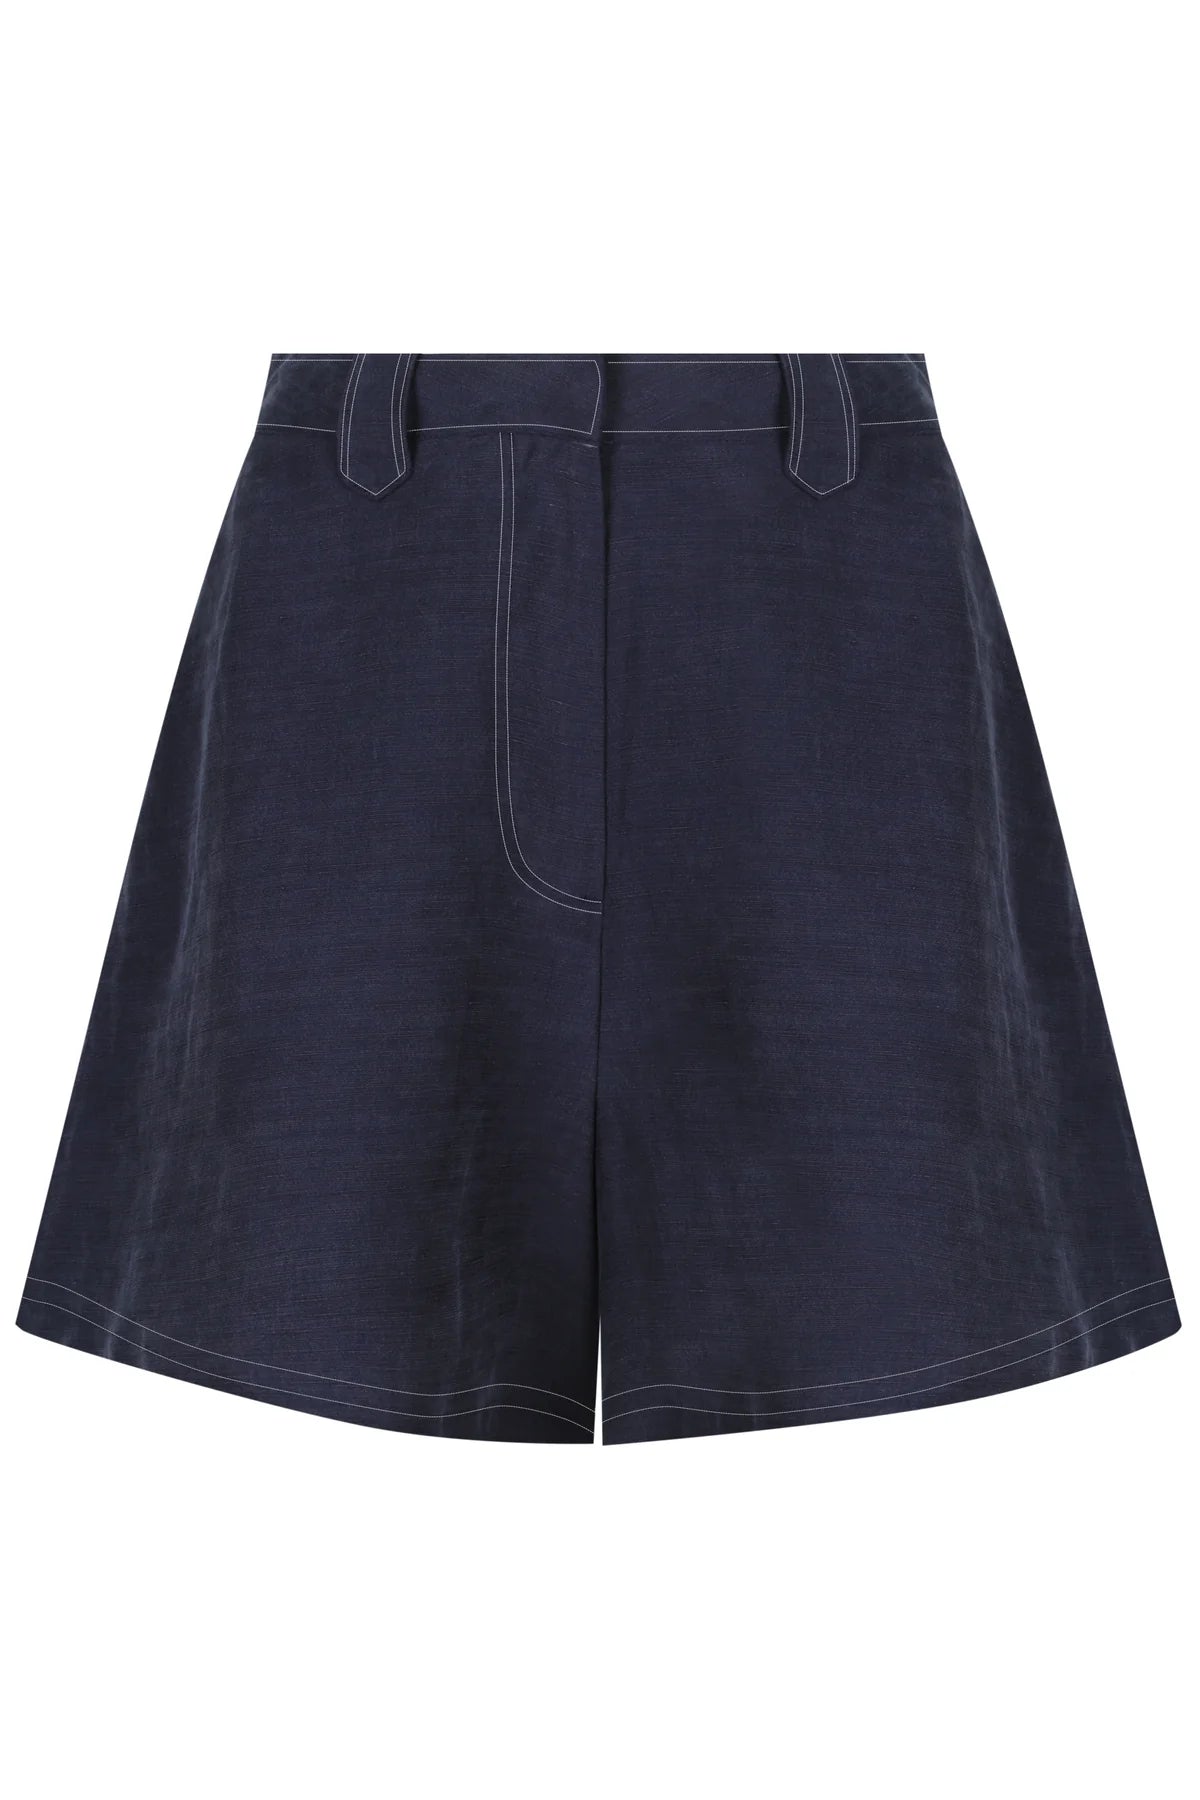 The Telese Shorts